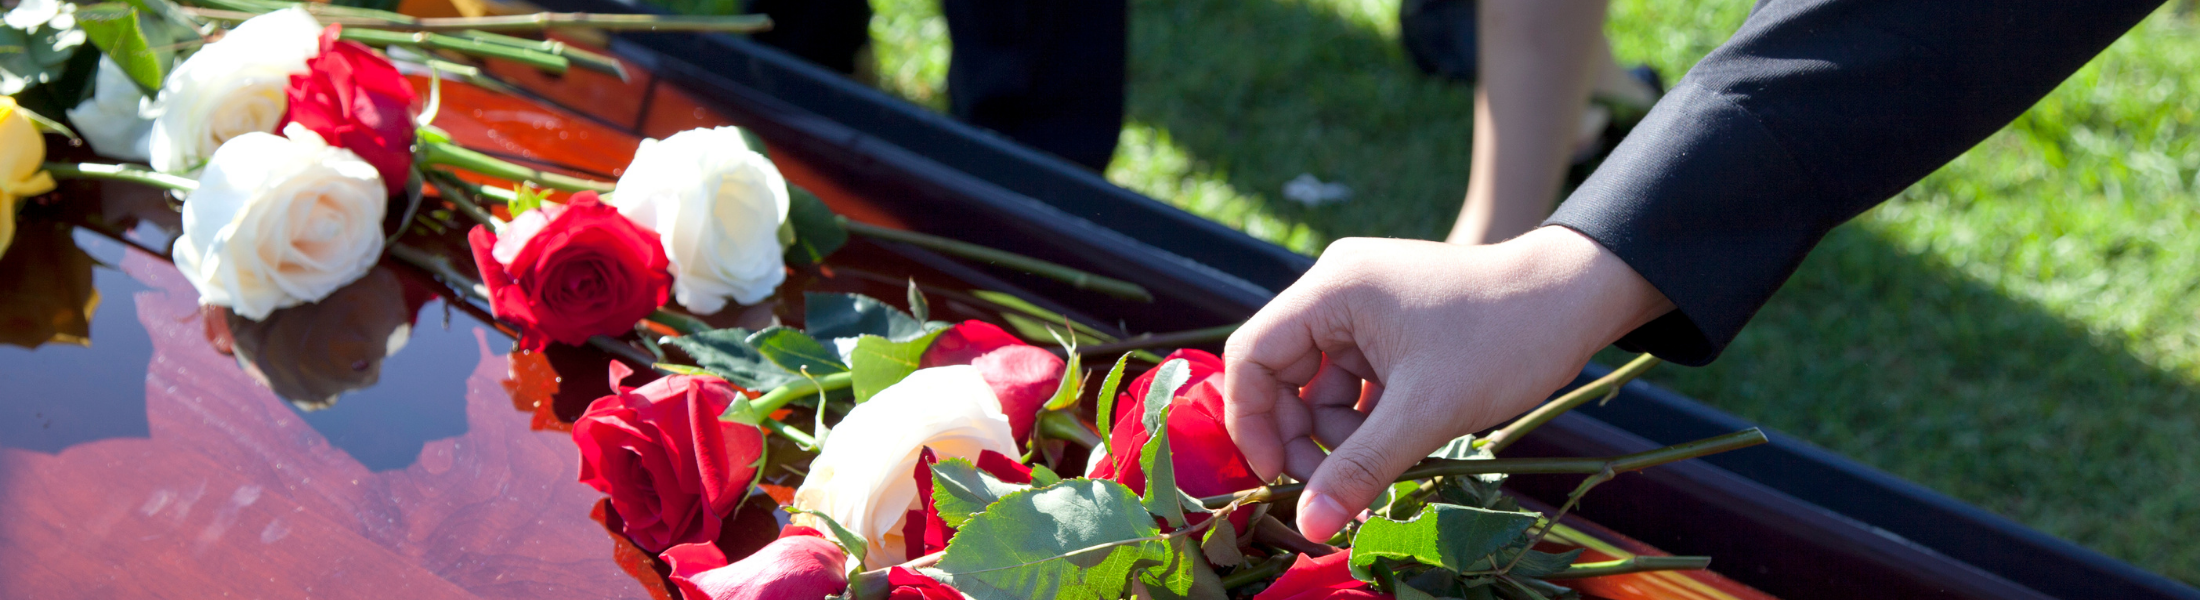 a hand laying flowers on a casket outdoors